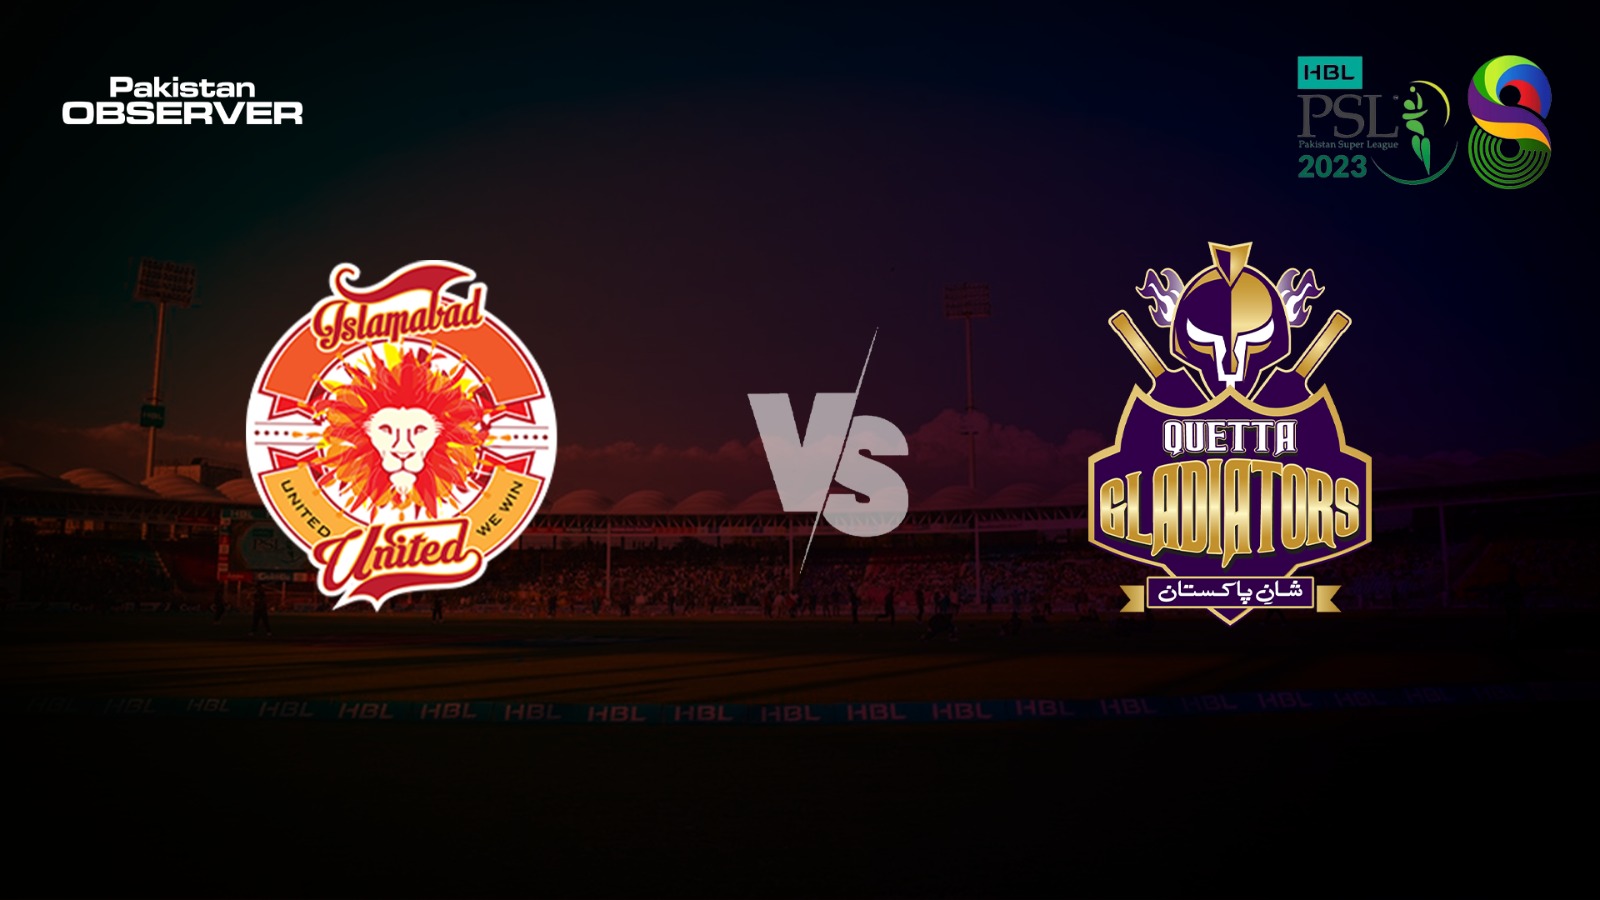 PSL 8 match no 13 Quetta Gladiators vs Islamabad United all you need to know